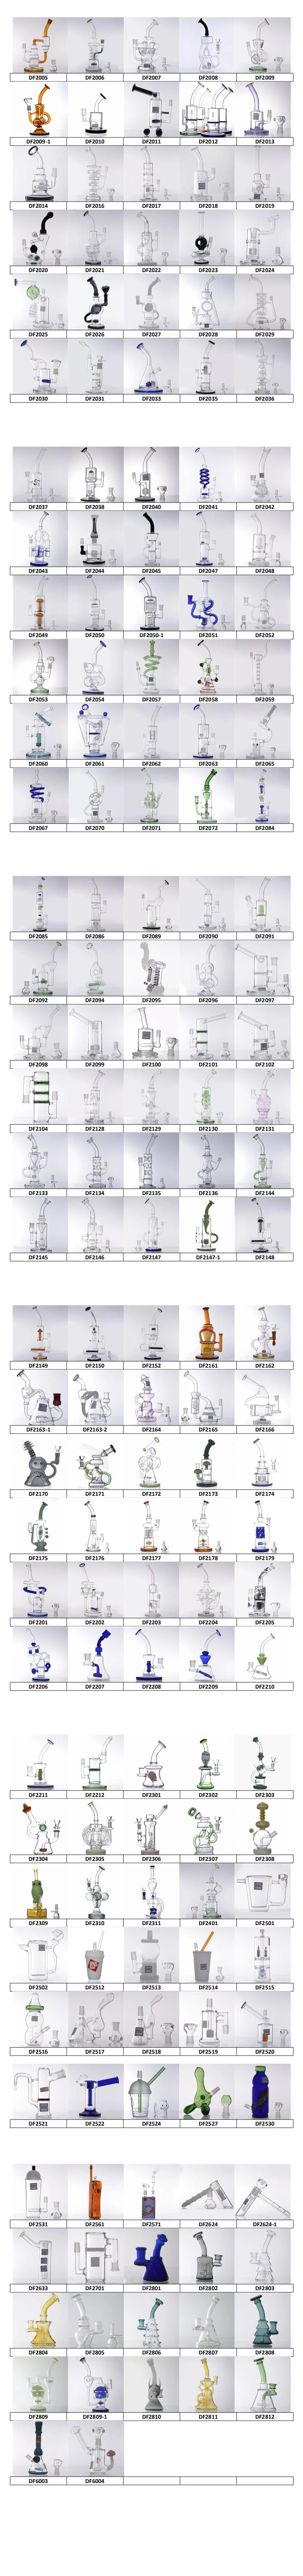 DF2811 Wholesale Simple and Cheaper Glass Smoking Hookah Water Pipe